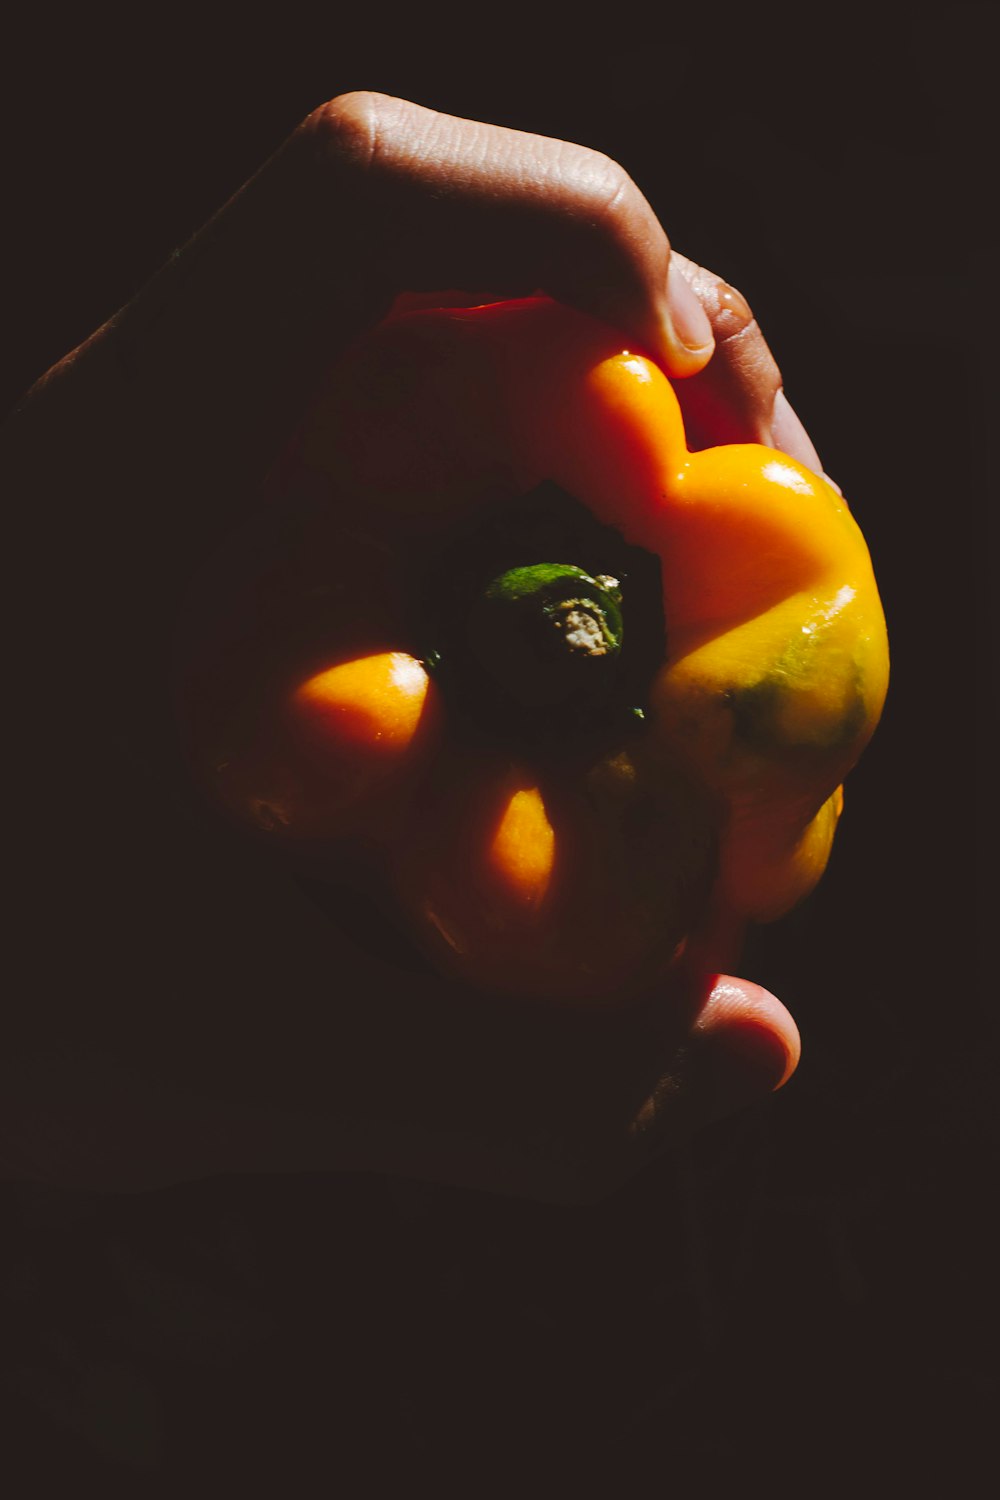 person holding yellow bell pepper